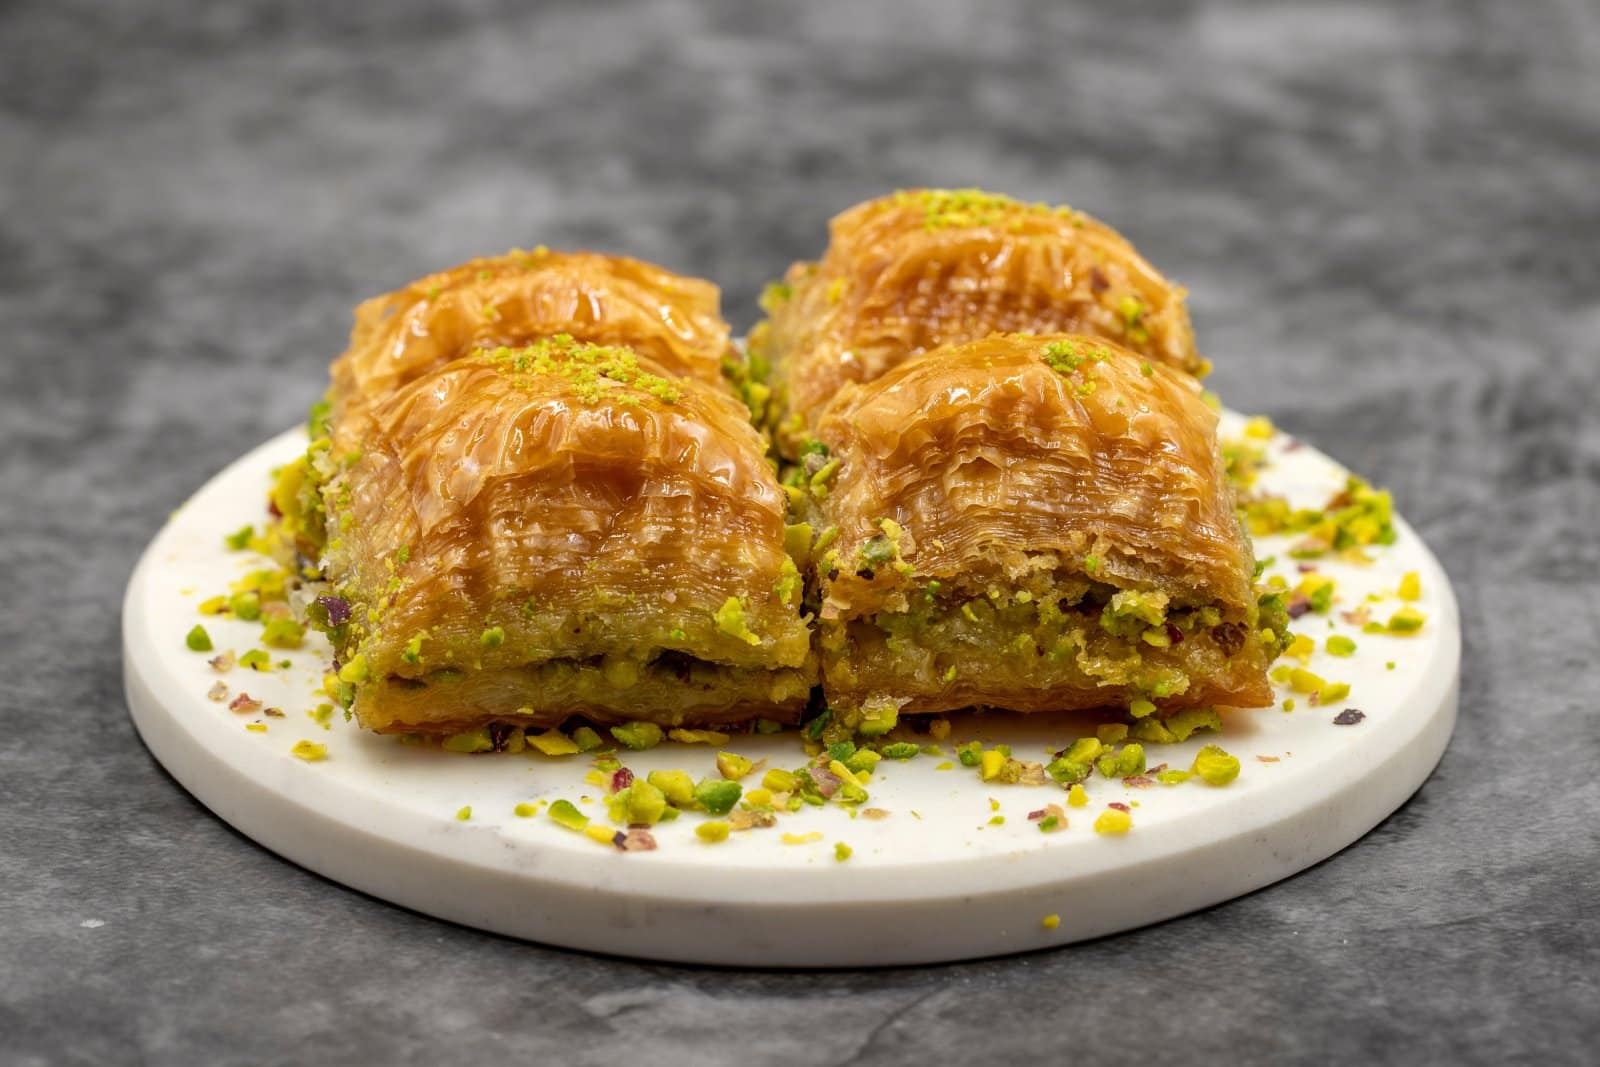 Image Credit: Shutterstock / Enez Selvi <p><span>Layers of filo pastry, nuts, and honey syrup come together in this sweet, sticky confection that’s a testament to the Ottoman Empire’s culinary legacy.</span></p>